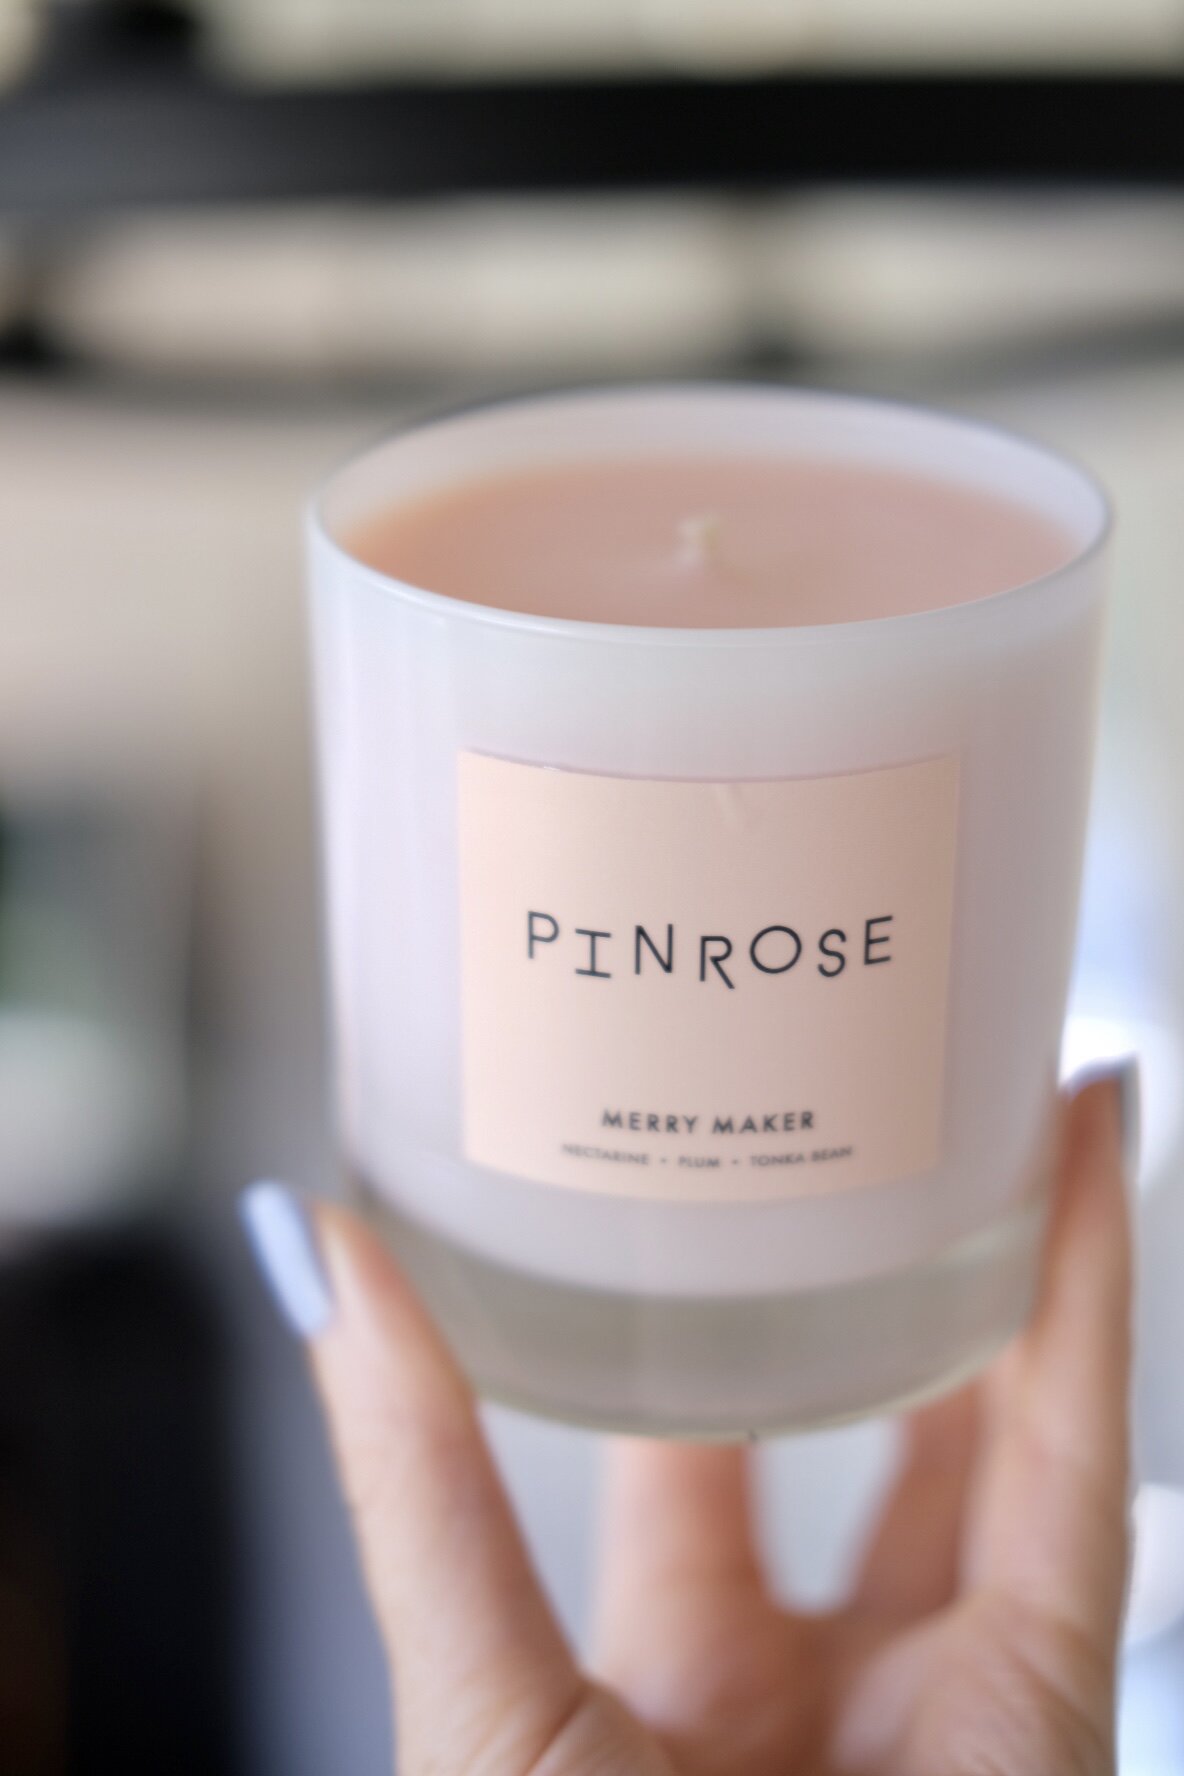 Pinrose Petal Starter Kit Review (Coupon Code included) - Clean, Cruelty Free and Vegan perfumes that smell amazing - full pinrose review - Pinrose candle.jpg